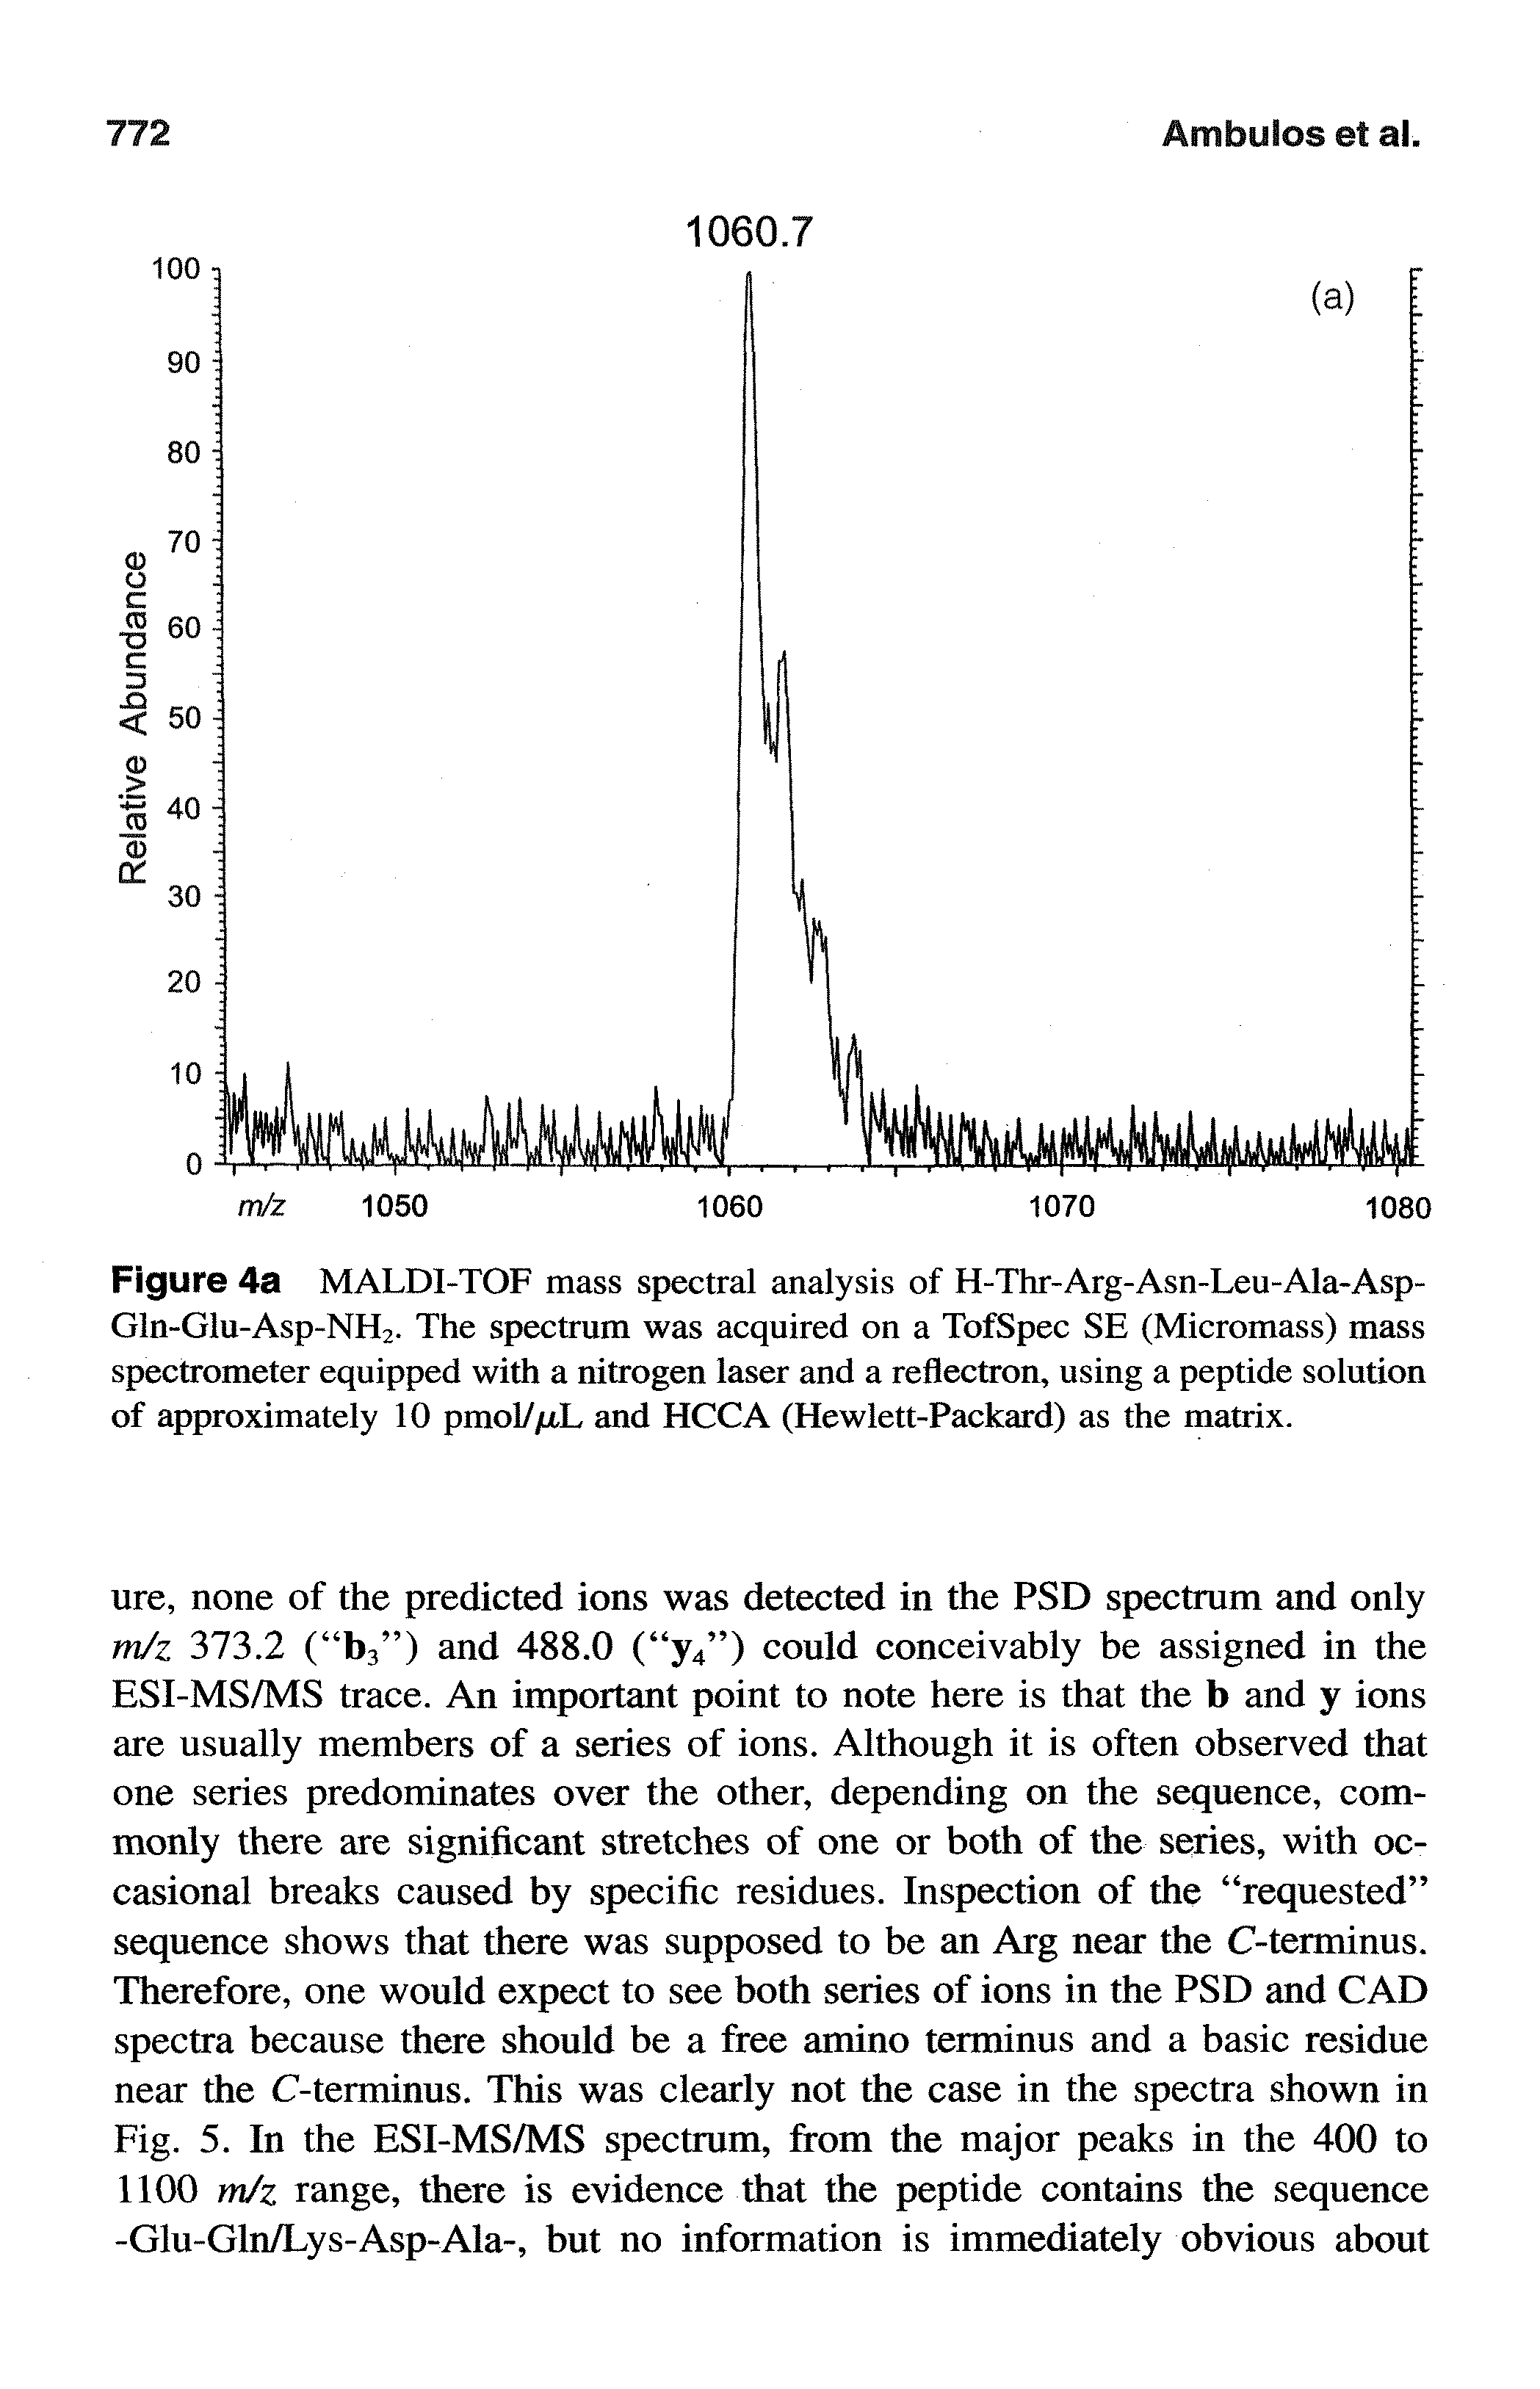 Figure 4a MALDI-TOF mass spectral analysis of H-Thr-Arg-Asn-Leu-Ala-Asp-Gln-Glu-Asp-NH2. The spectrum was acquired on a TofSpec SE (Micromass) mass spectrometer equipped with a nitrogen laser and a reflectron, using a peptide solution of approximately 10 pmol//u,L and HCCA (Hewlett-Packard) as the matrix.